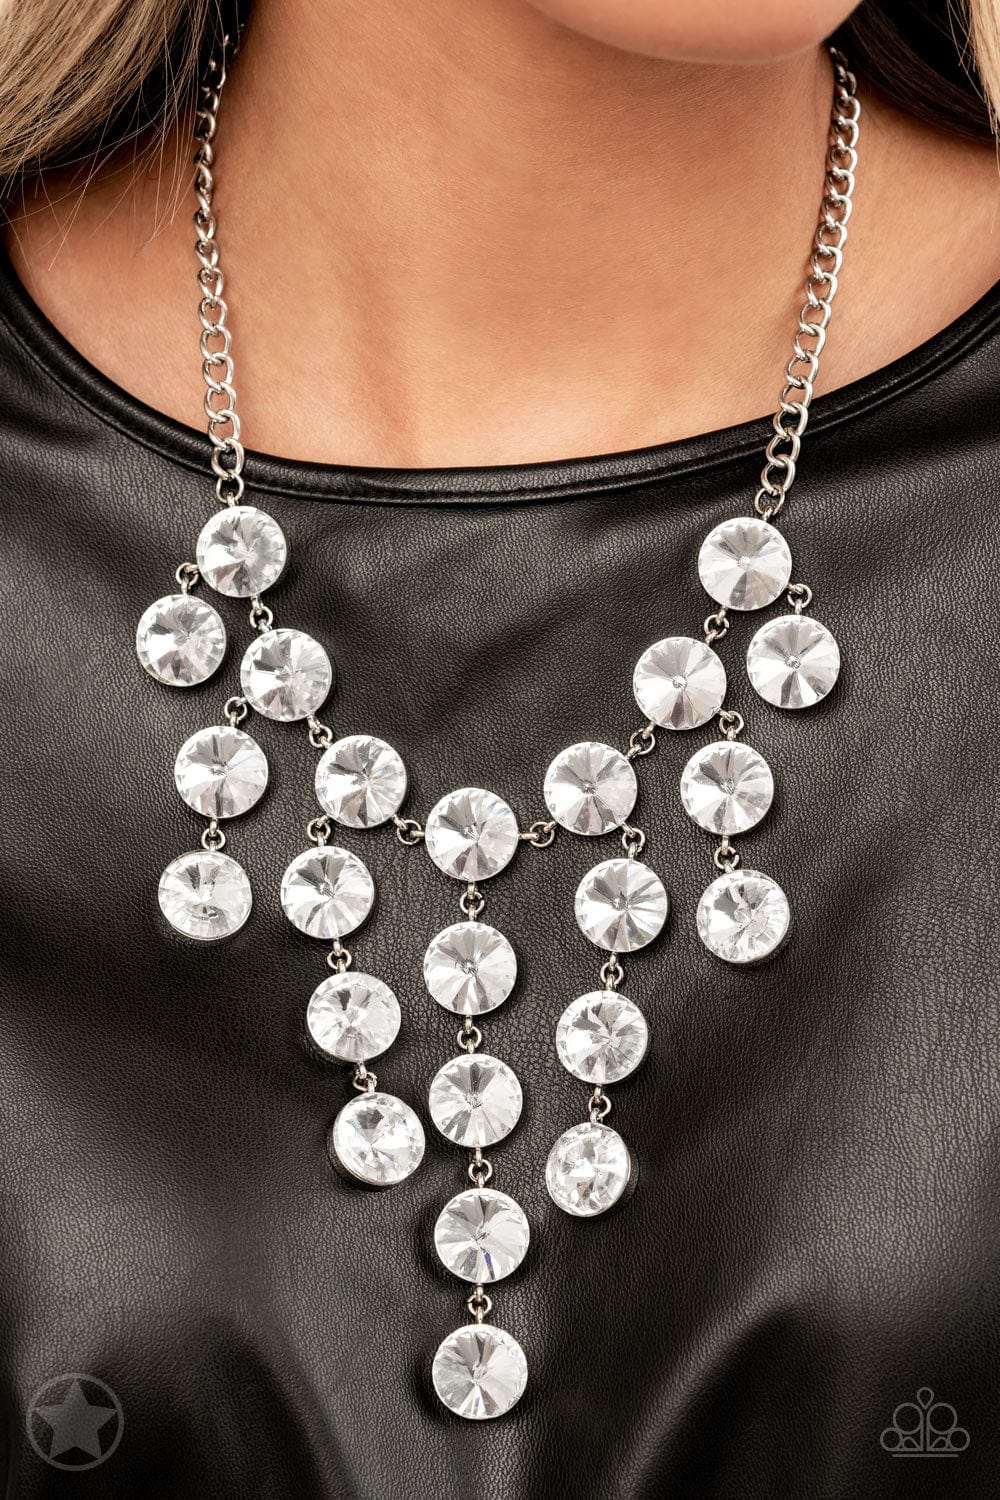 Fashion Jewelry, sparkling silver necklace with rhinestones